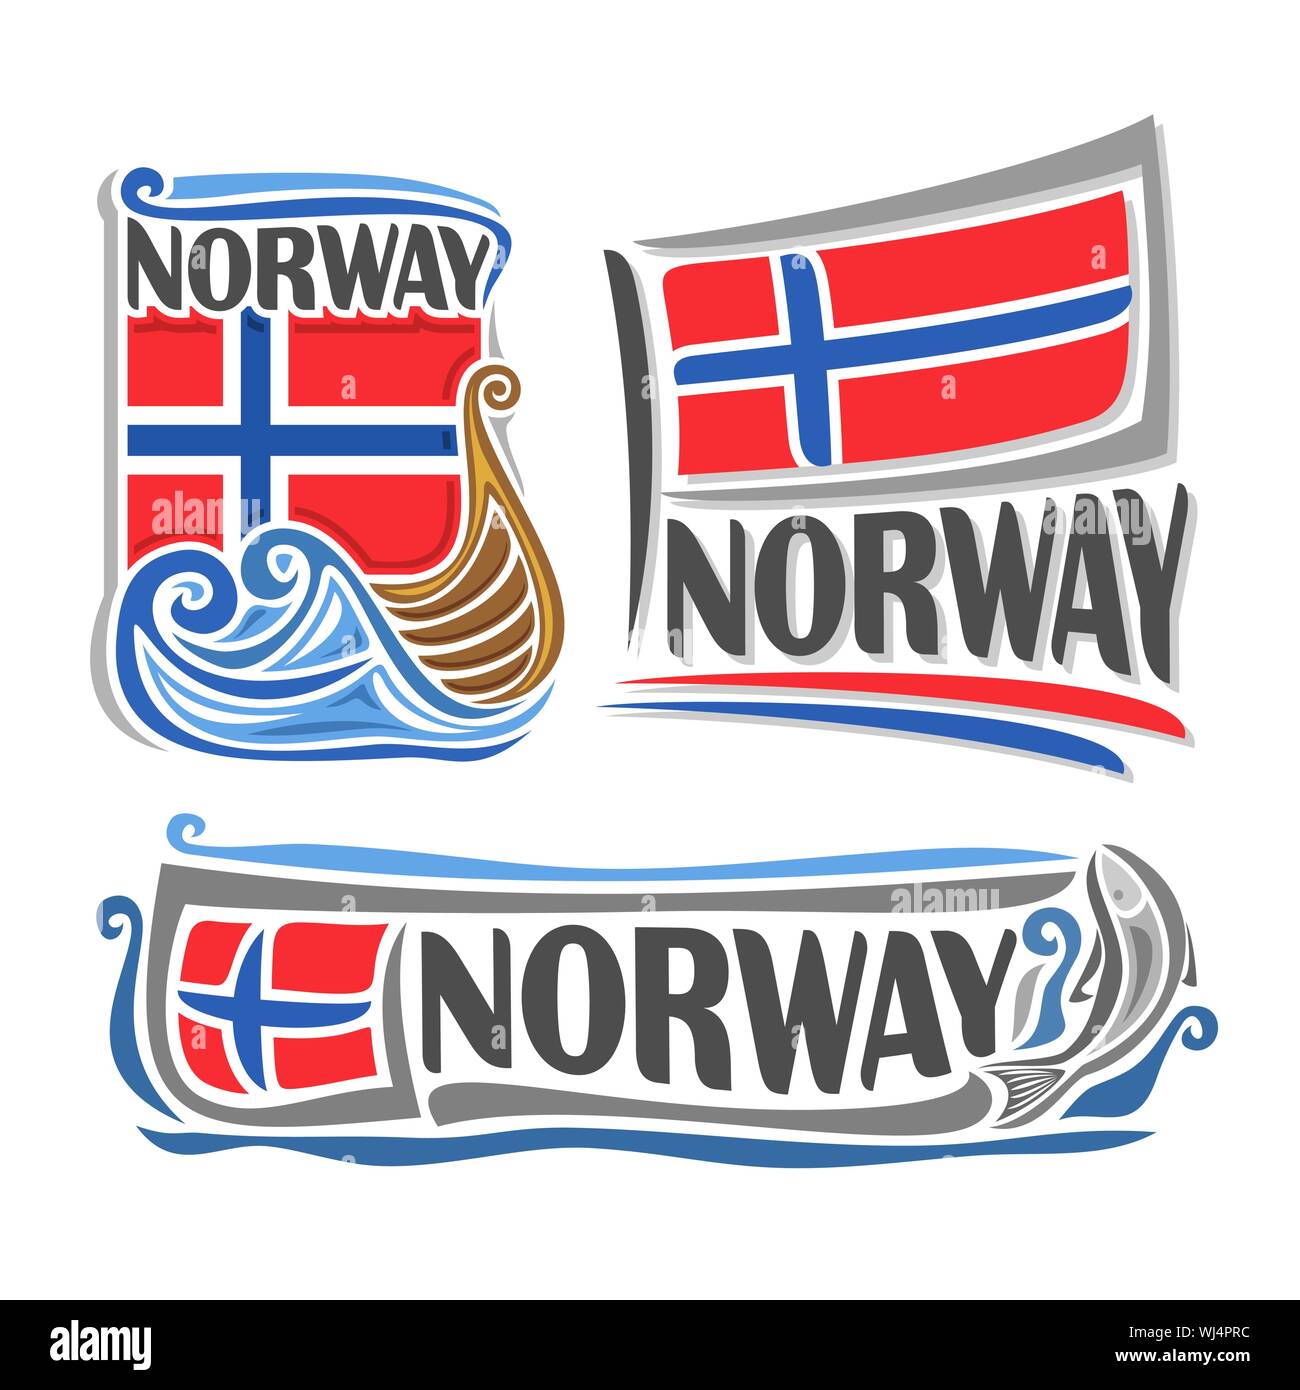 Vector illustration of logo for Norway, 3 isolated illustrations: norwegian national state flag over the boat on the waves, horizontal symbol of Norwa Stock Vector